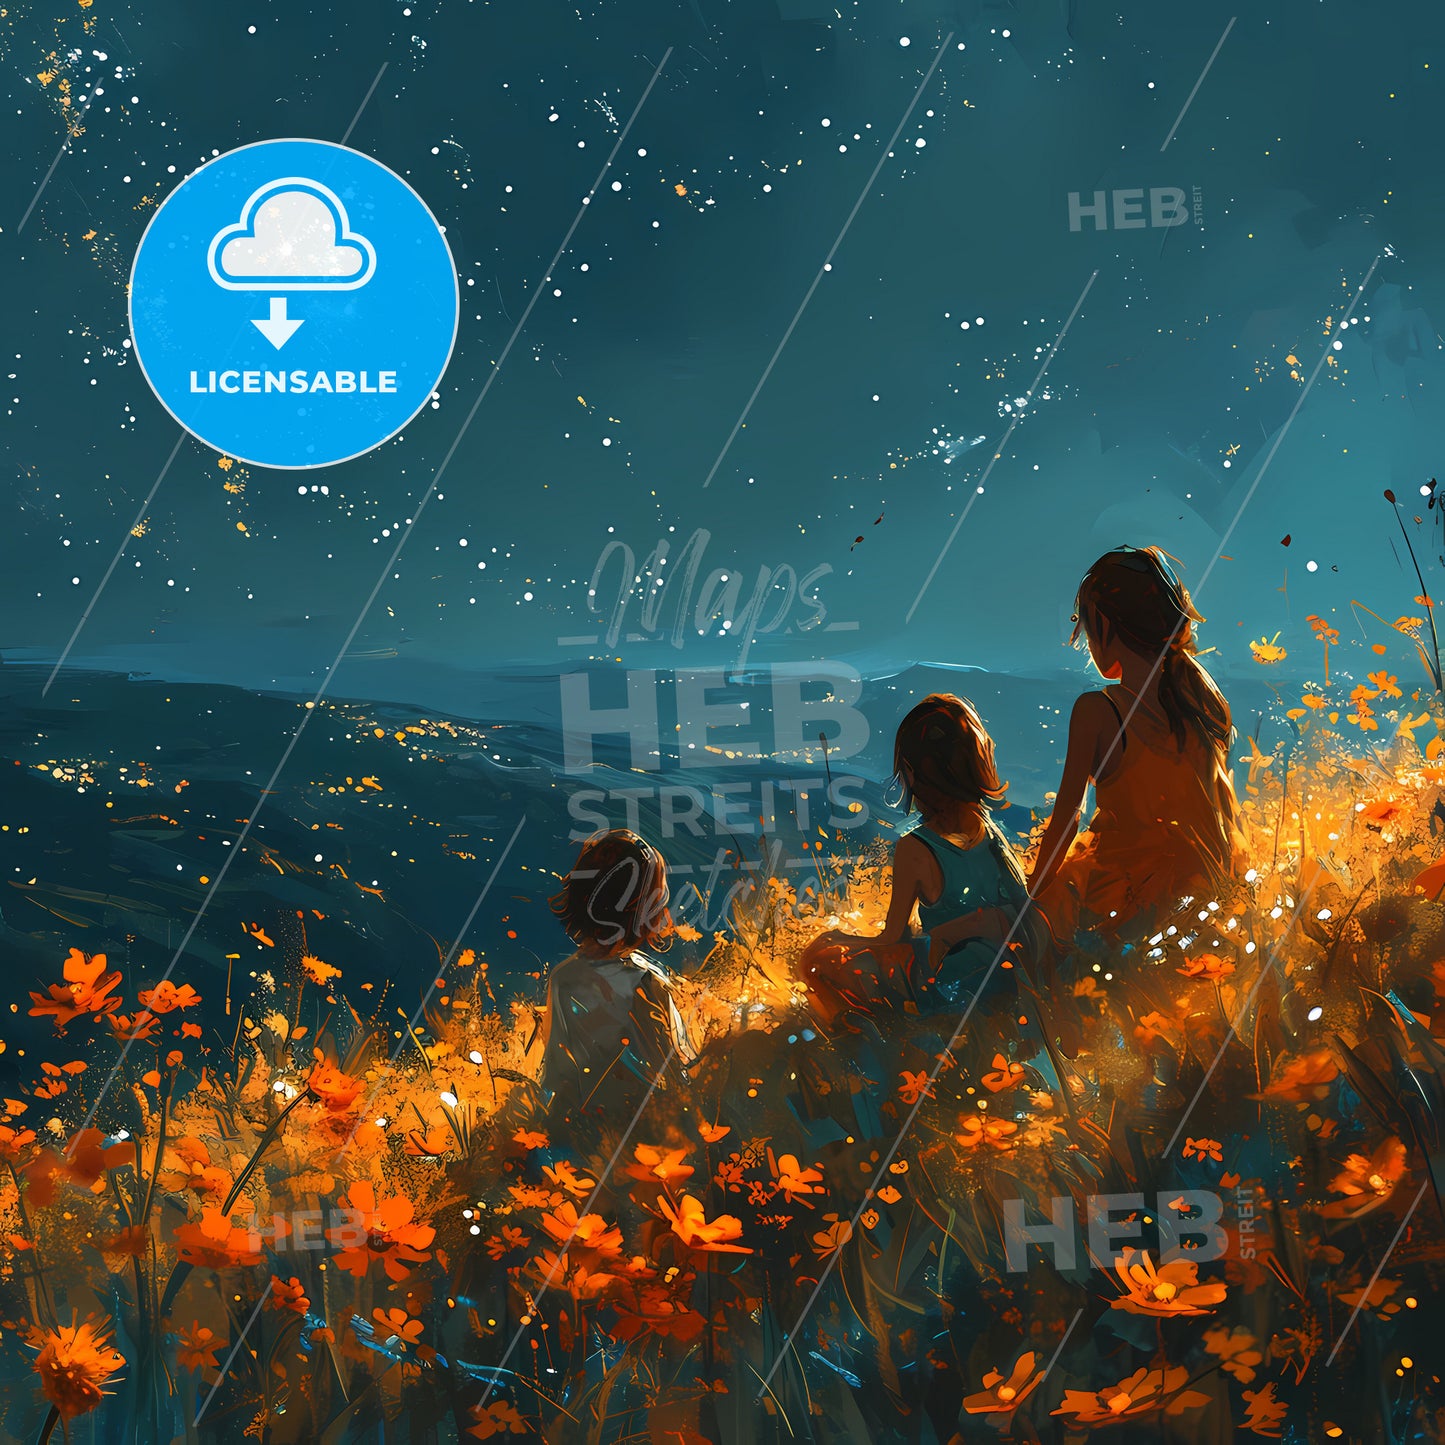 A Group Of 5 Friends Laying In A Field Stargazing, A Woman And Two Children Sitting In A Field Of Flowers